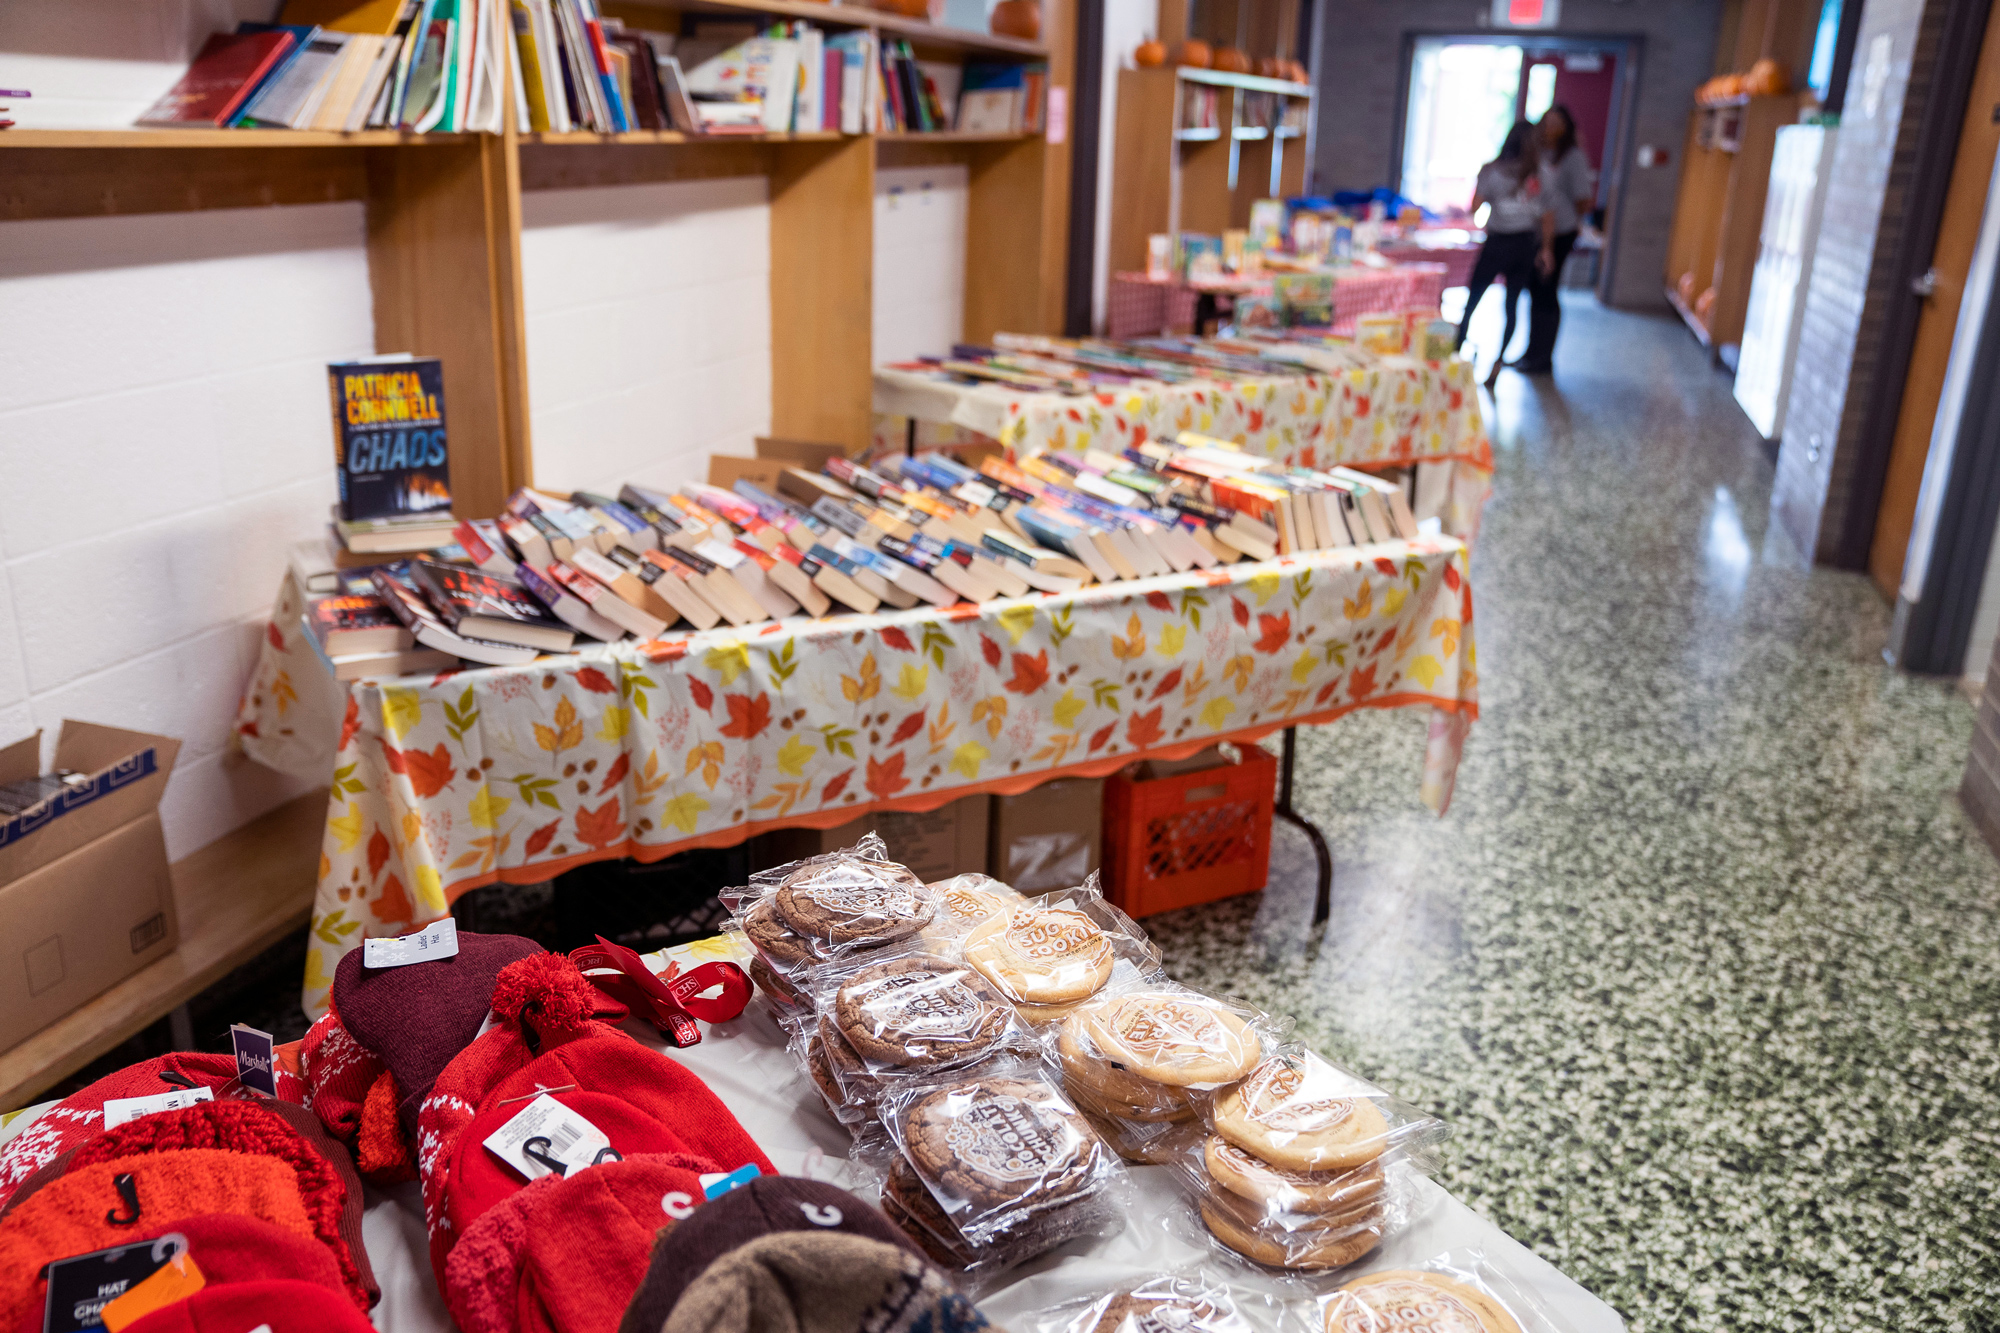 winter supplies, cookies, and books placed on top of tables in a school